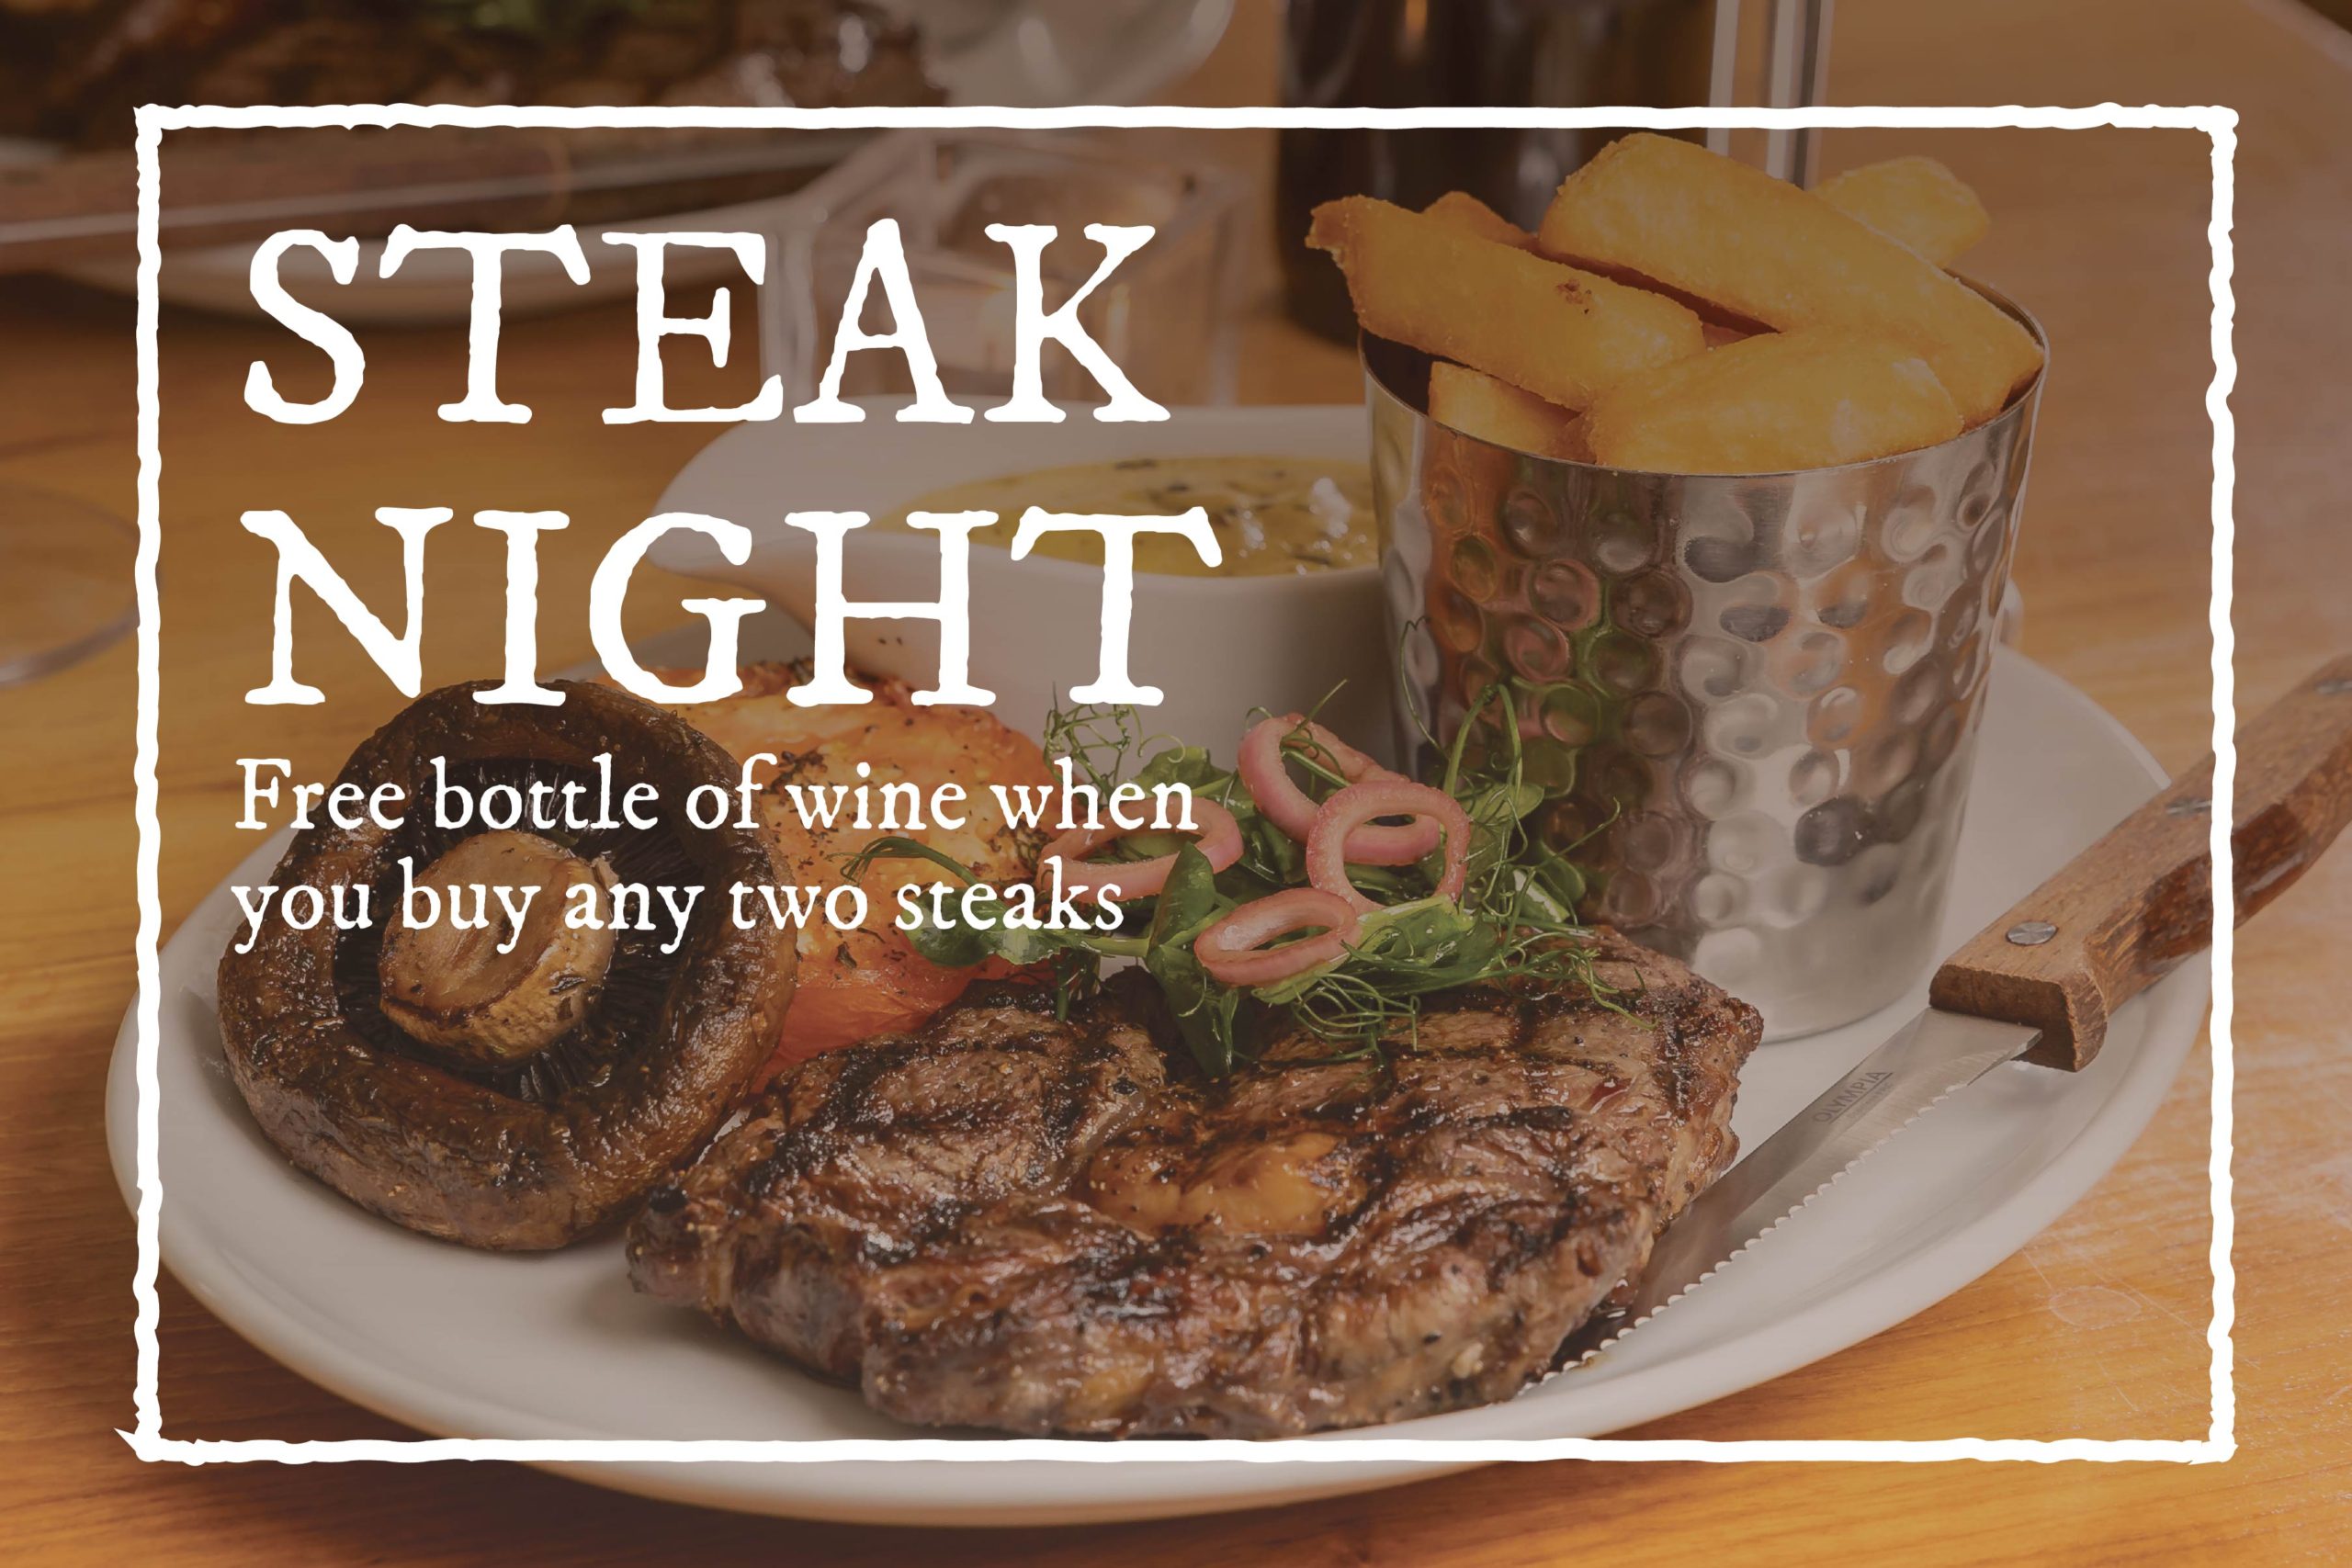 Buy 2 steaks and get a bottle of wine free